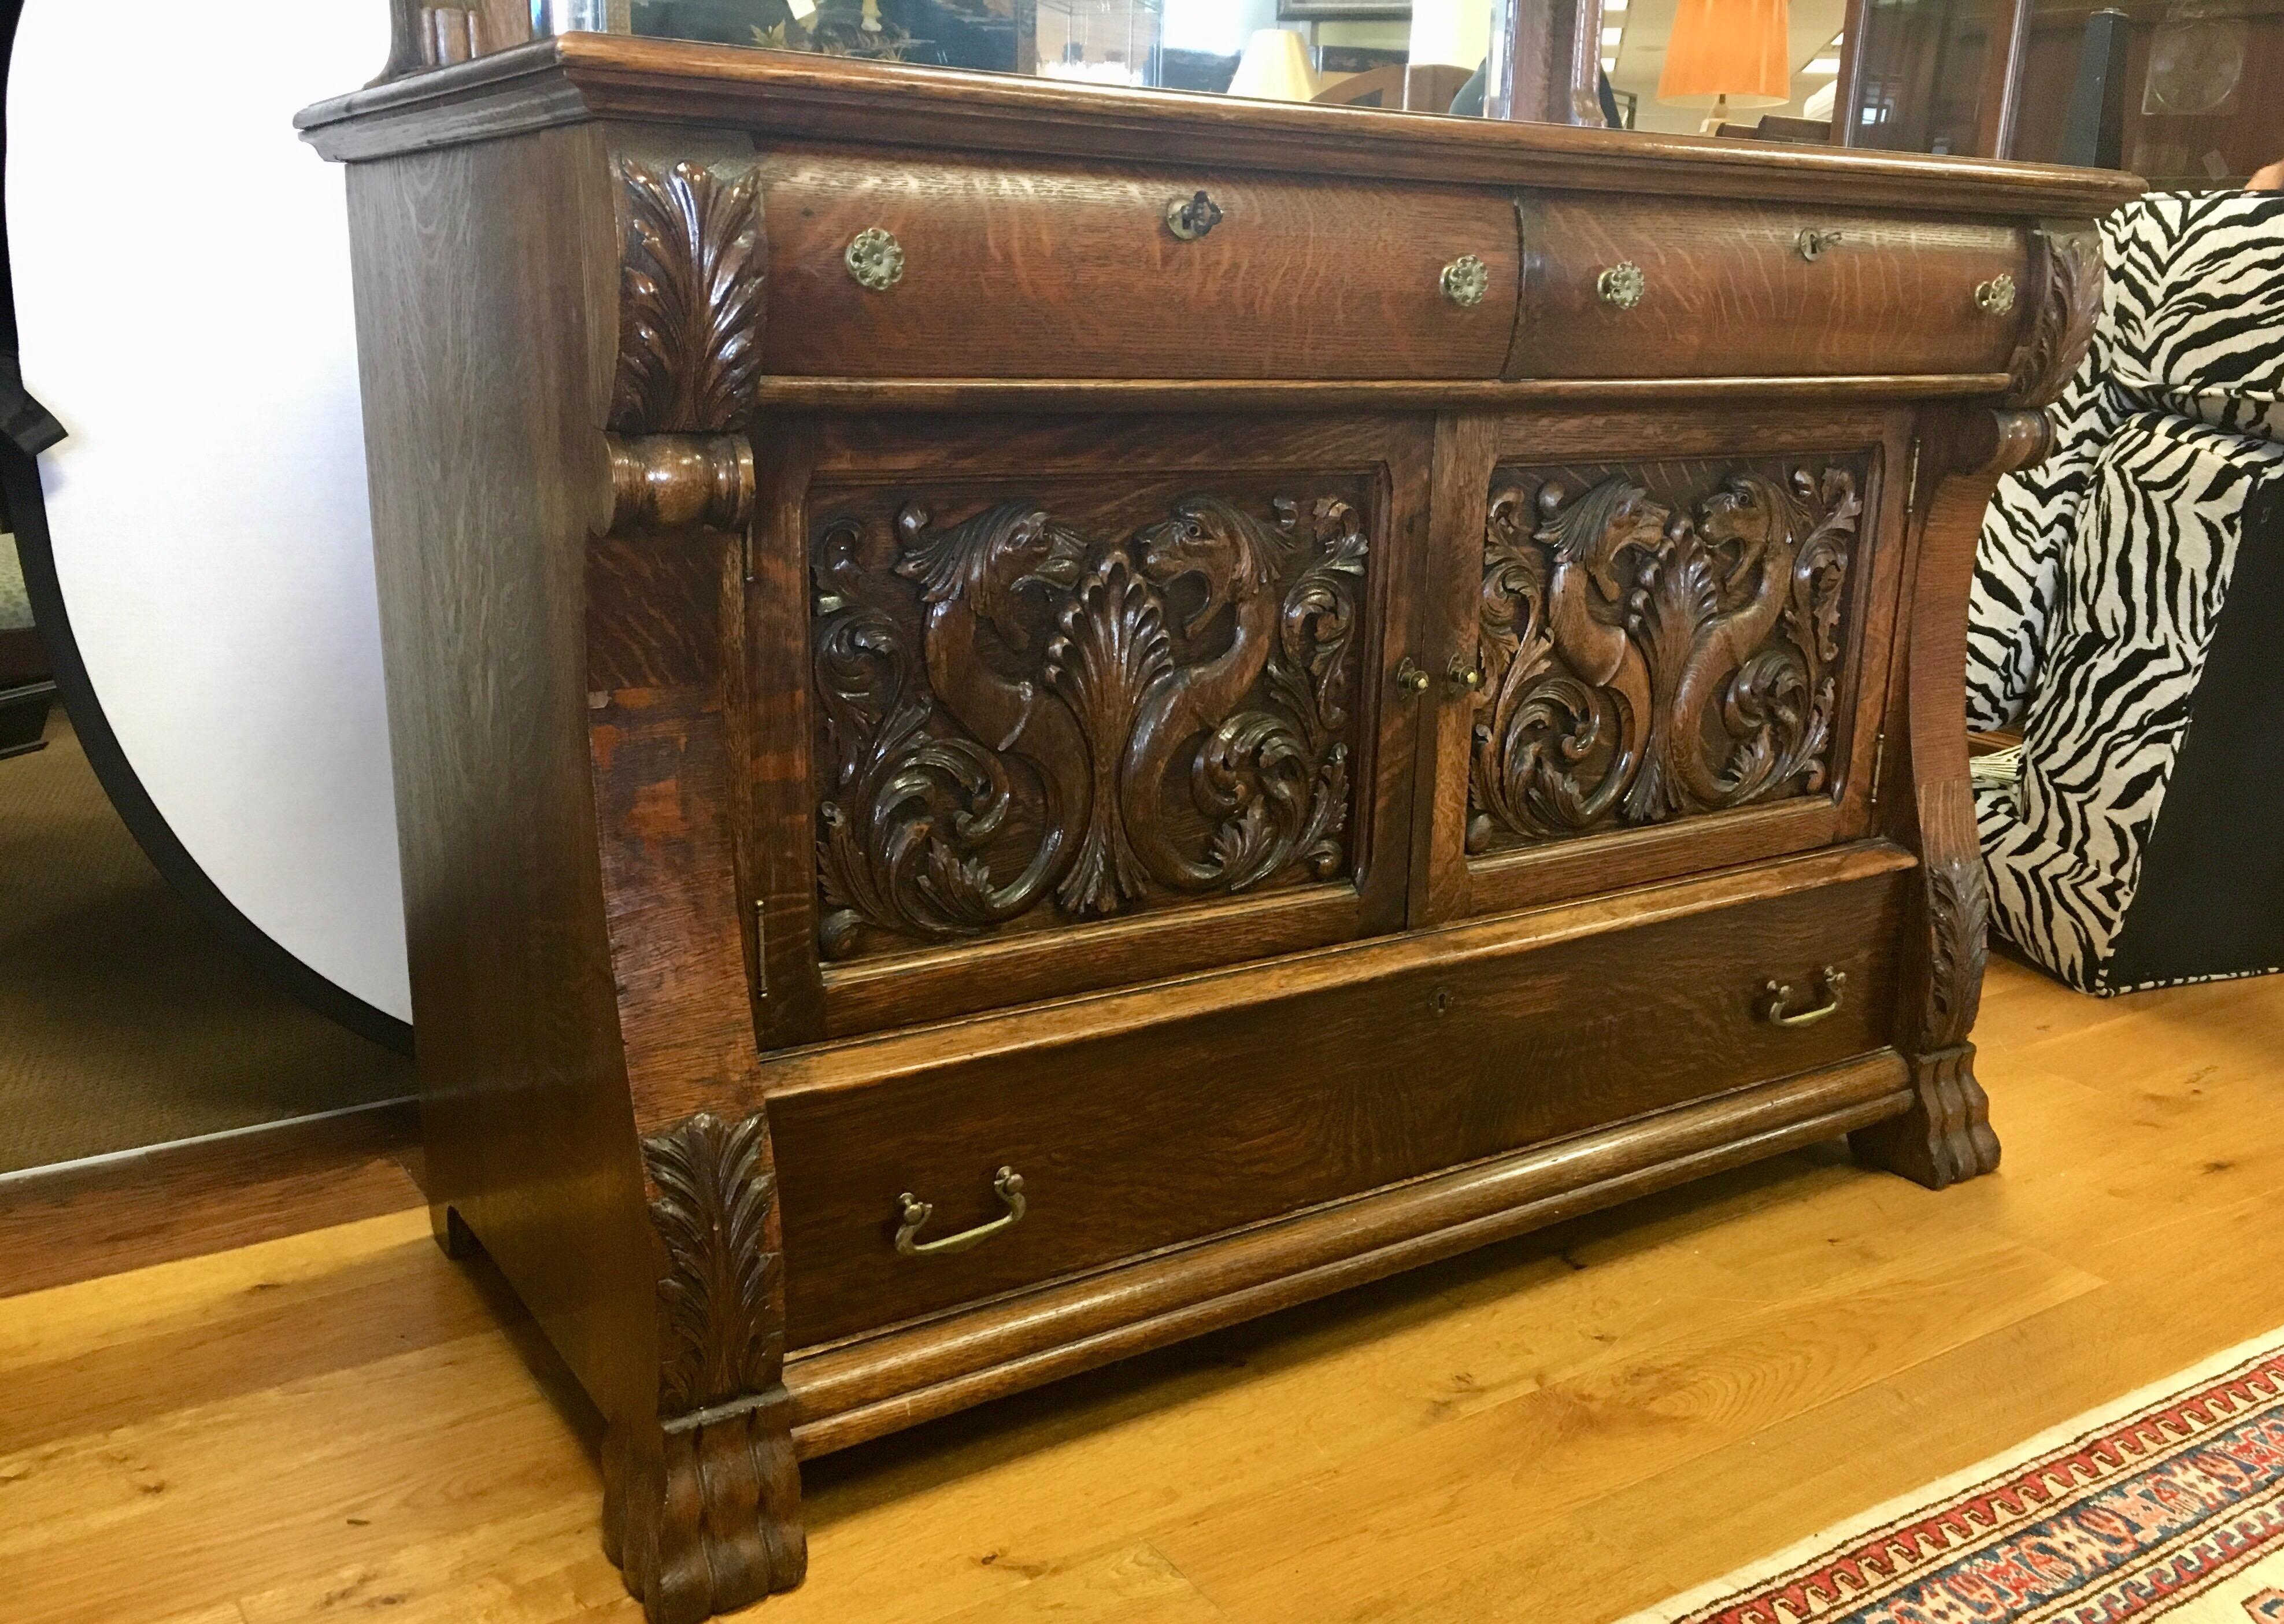 Rare and unusual carvings adorn this 19th century English George III cabinet. Features include lockable drawers and keys. The carvings on the front are magnificent.